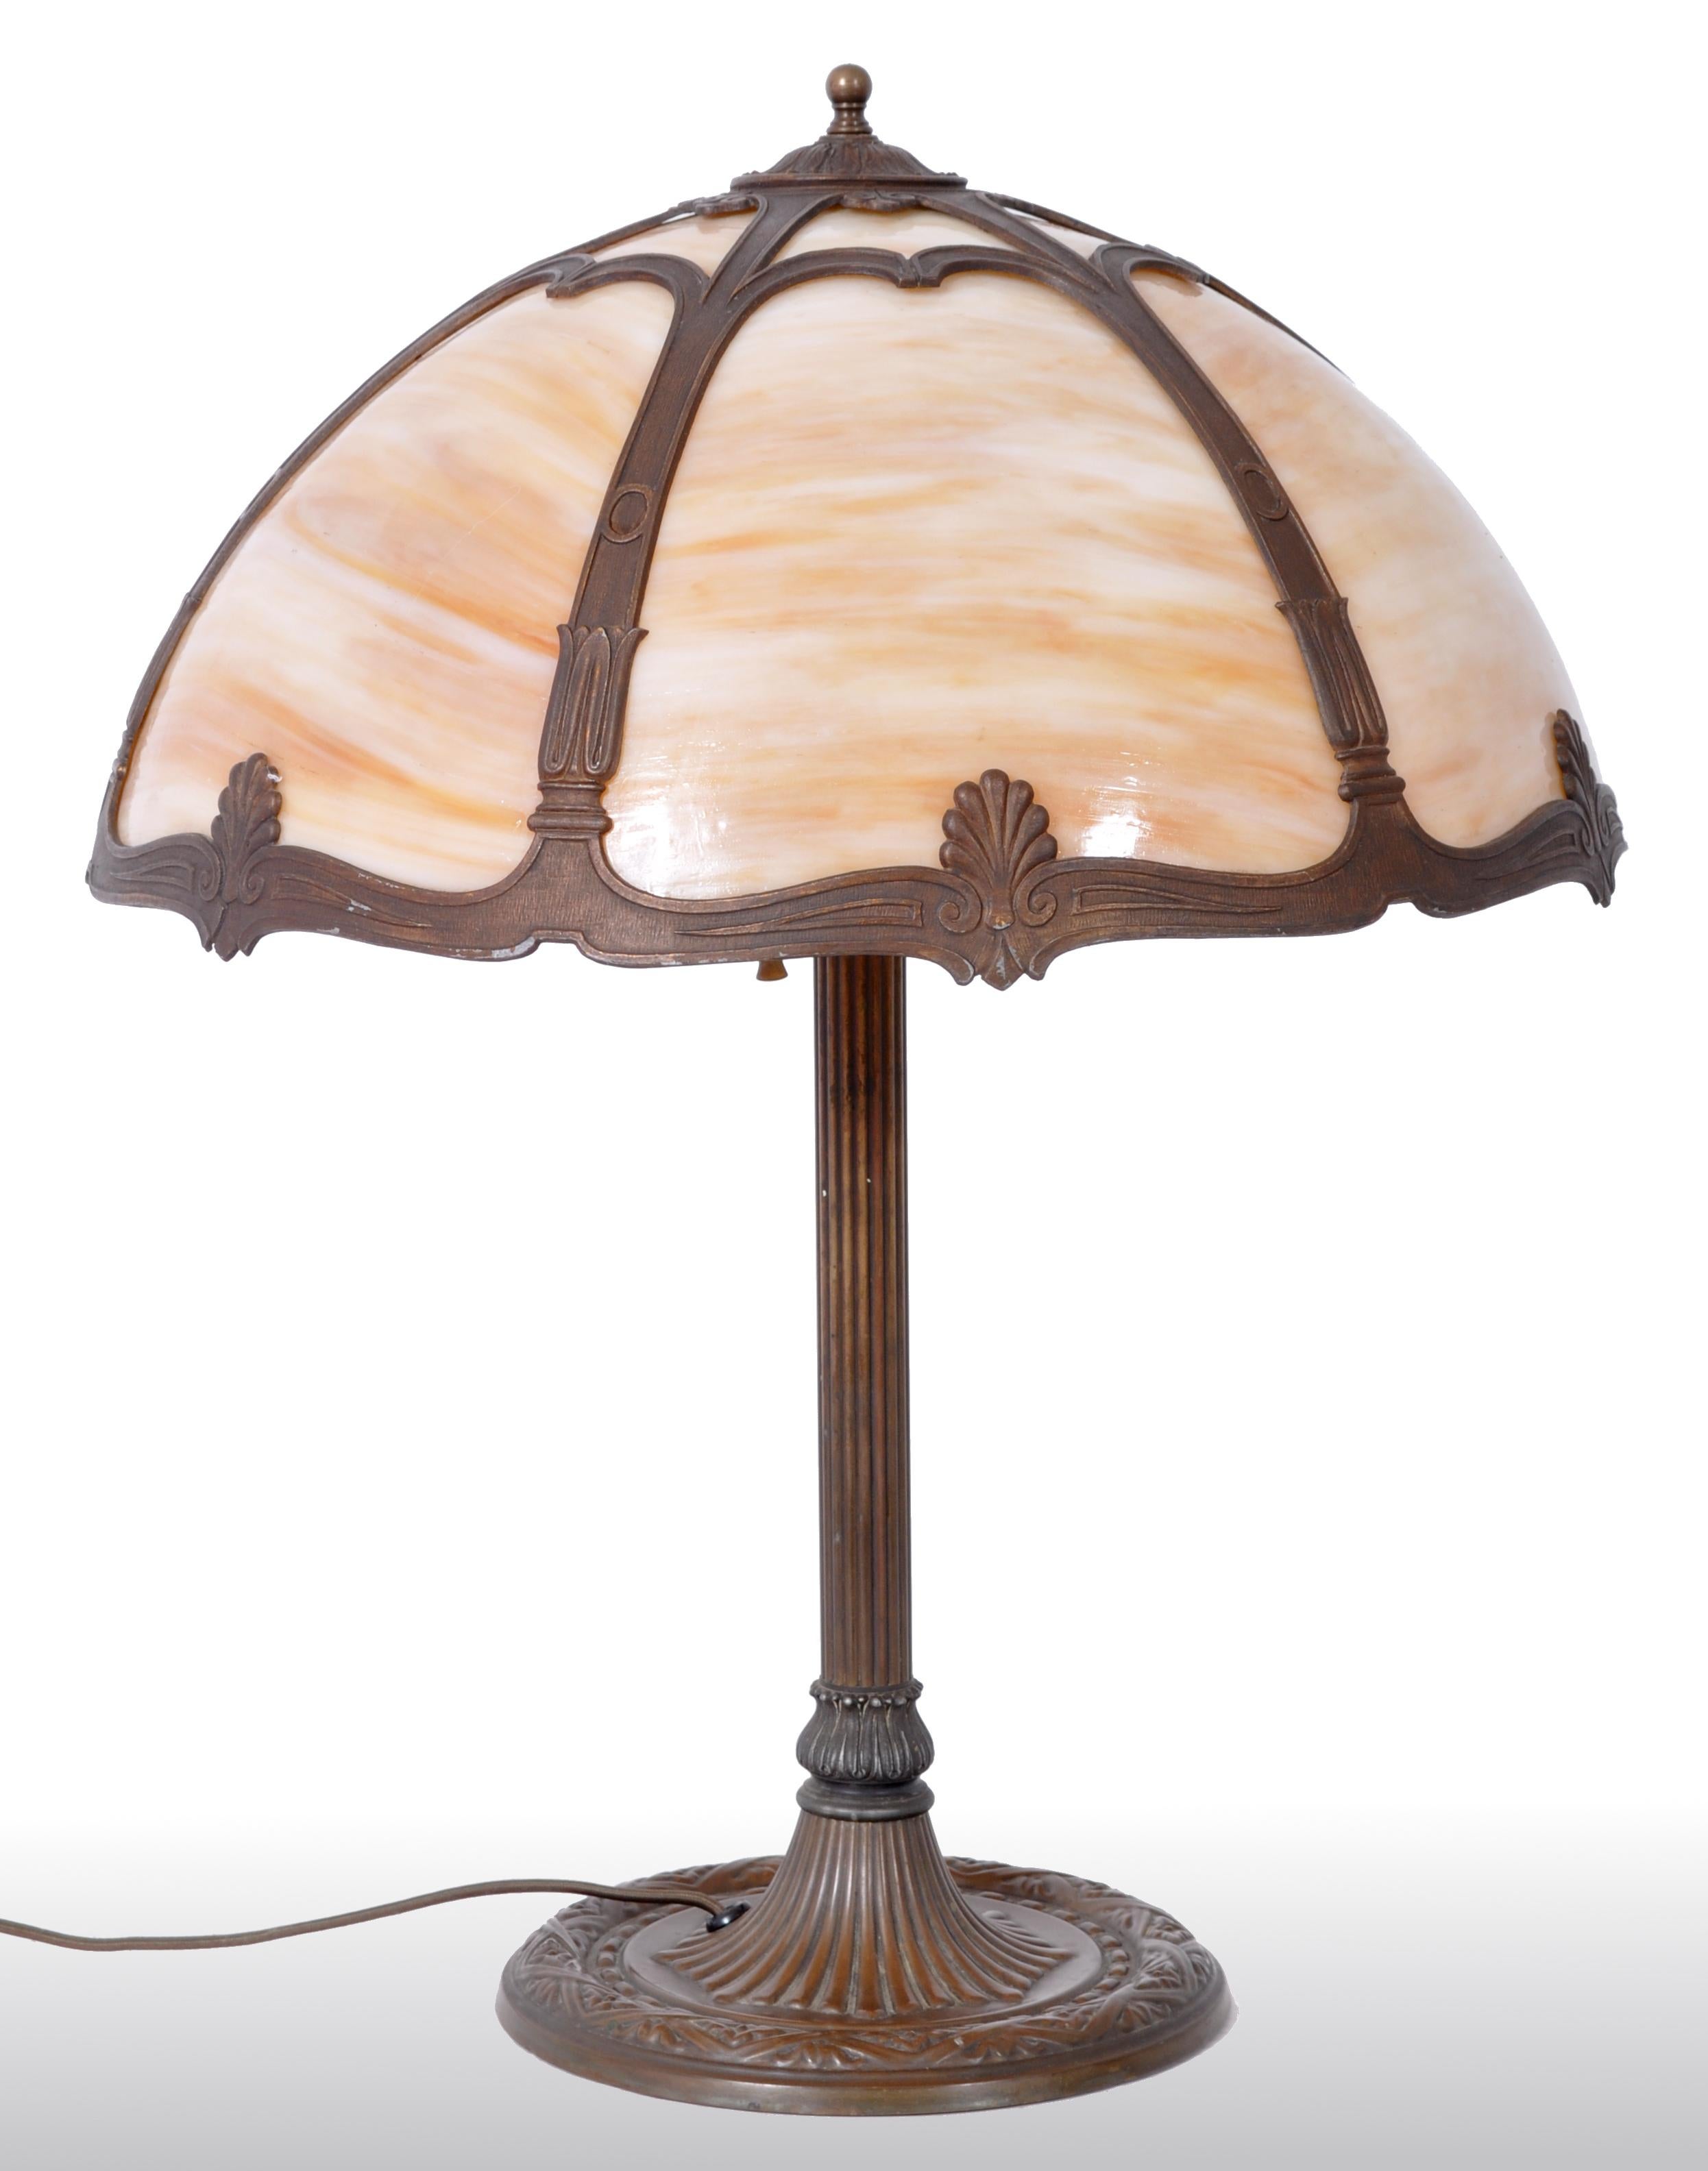 Antique American Art Nouveau slag glass and bronze table lamp by Bradley & Hubbard, circa 1915. The lamp having a six-panel striated caramel slag glass shade above a bronze column base. The lamp having twin fixtures with the original pull-chains,